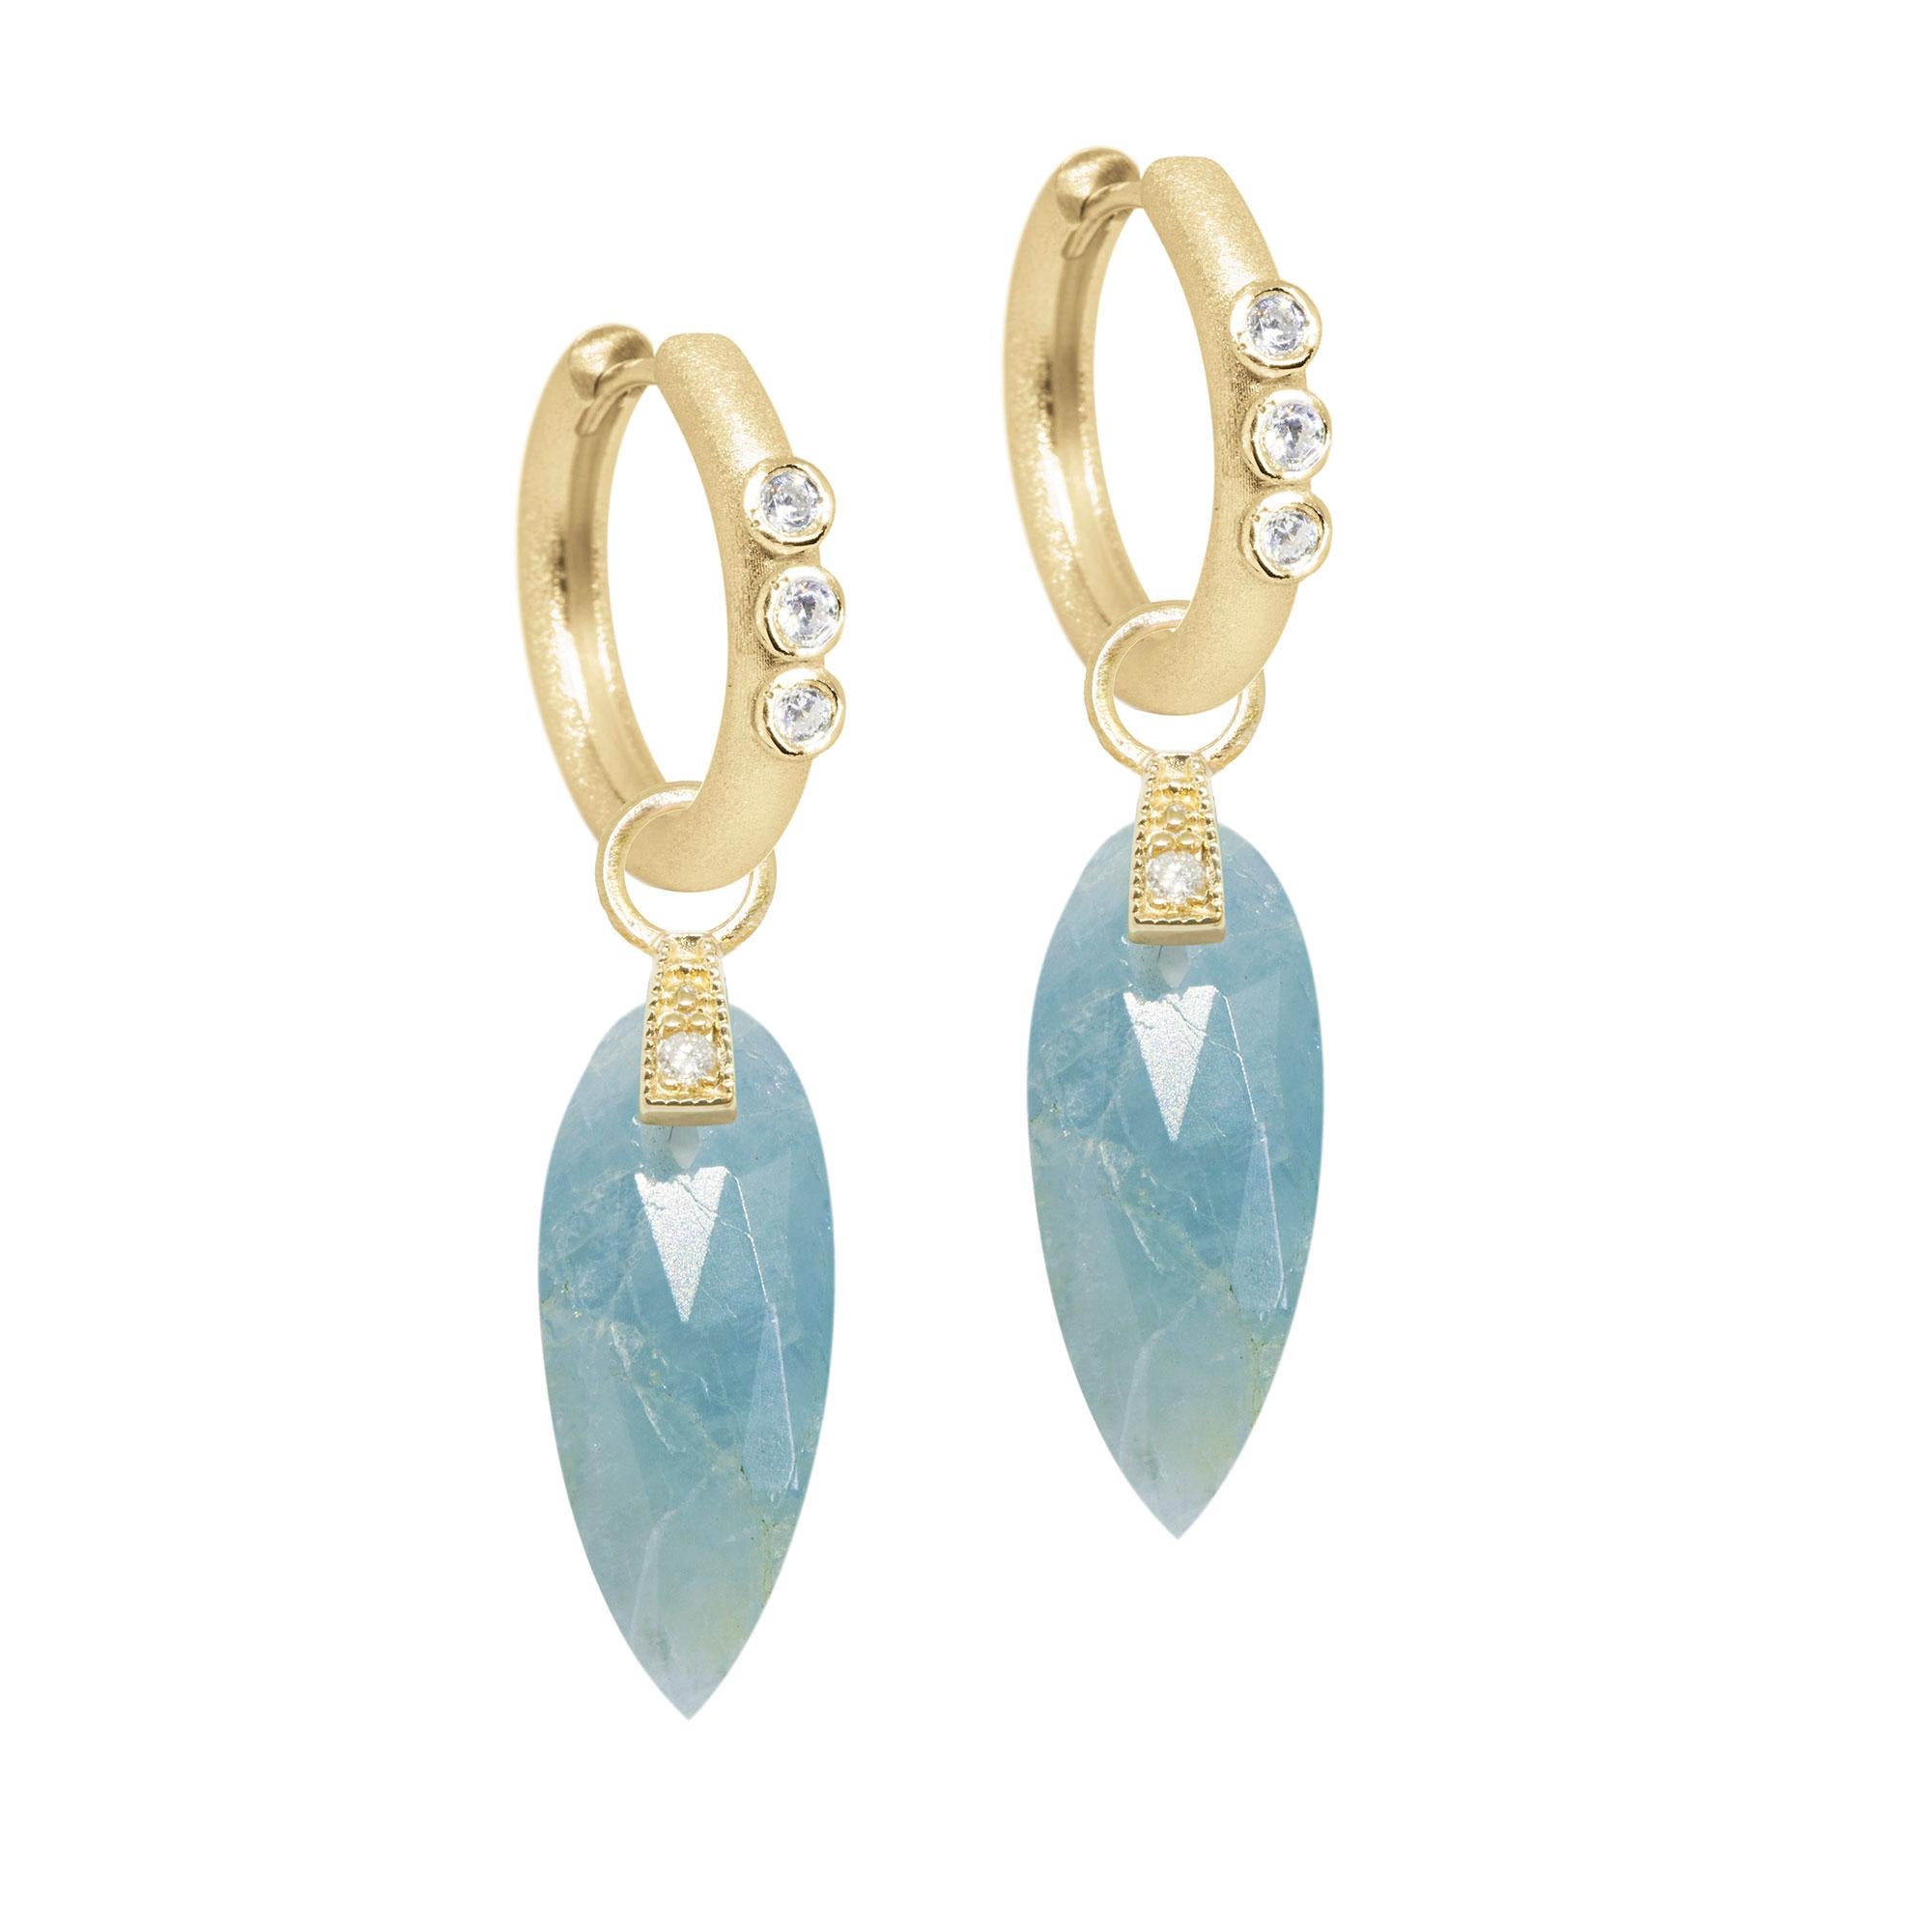 The perfect everyday style, the Angel Wings 20mm Gold Charms feature milky lapis drops dangling from a diamond-studded bale.


Nina Wynn Design's patent-pending earrings have an element on the back of the stud or charm to allow these pieces to